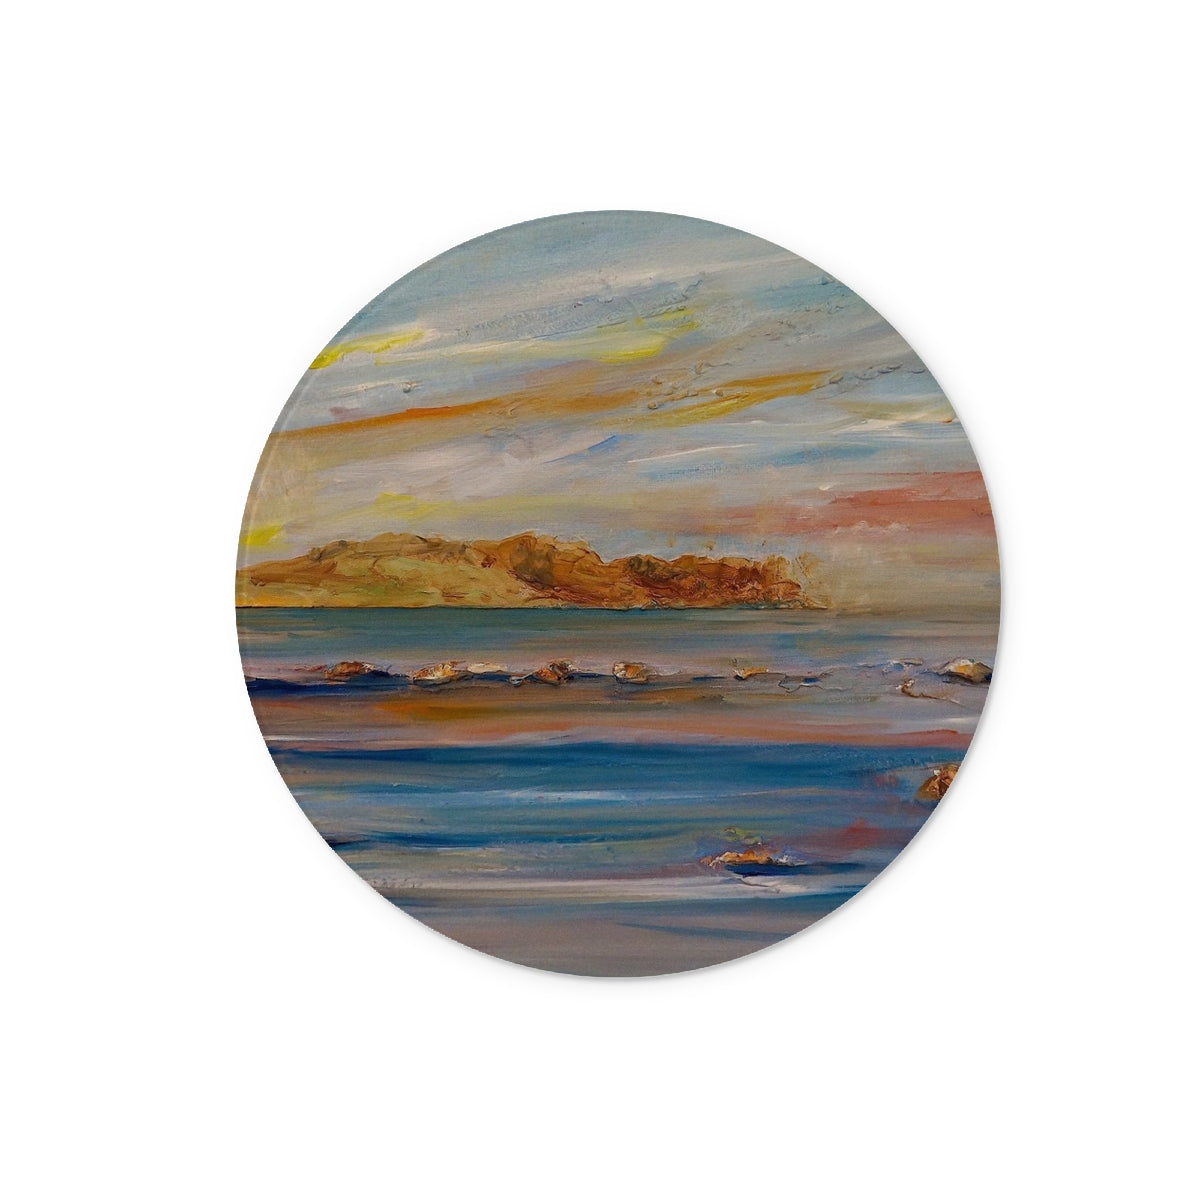 Tiree Dawn Art Gifts Glass Chopping Board-Glass Chopping Boards-Hebridean Islands Art Gallery-12" Round-Paintings, Prints, Homeware, Art Gifts From Scotland By Scottish Artist Kevin Hunter